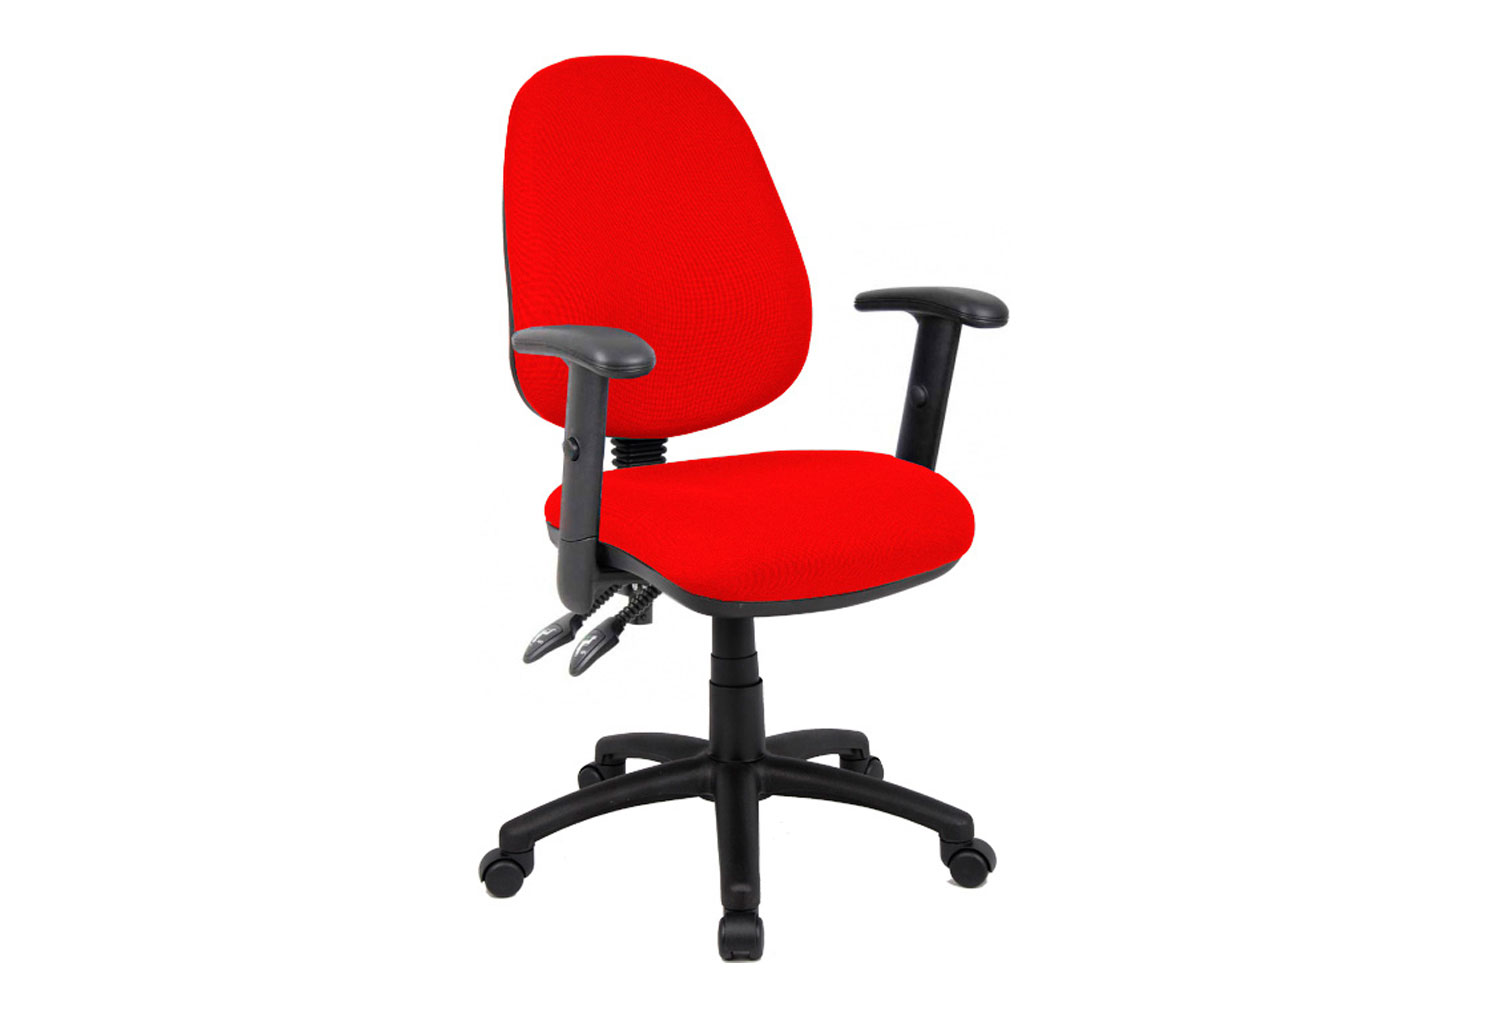 Full Lumbar 2 Lever Operator Office Chair With Adjustable Arms, Red, Express Delivery